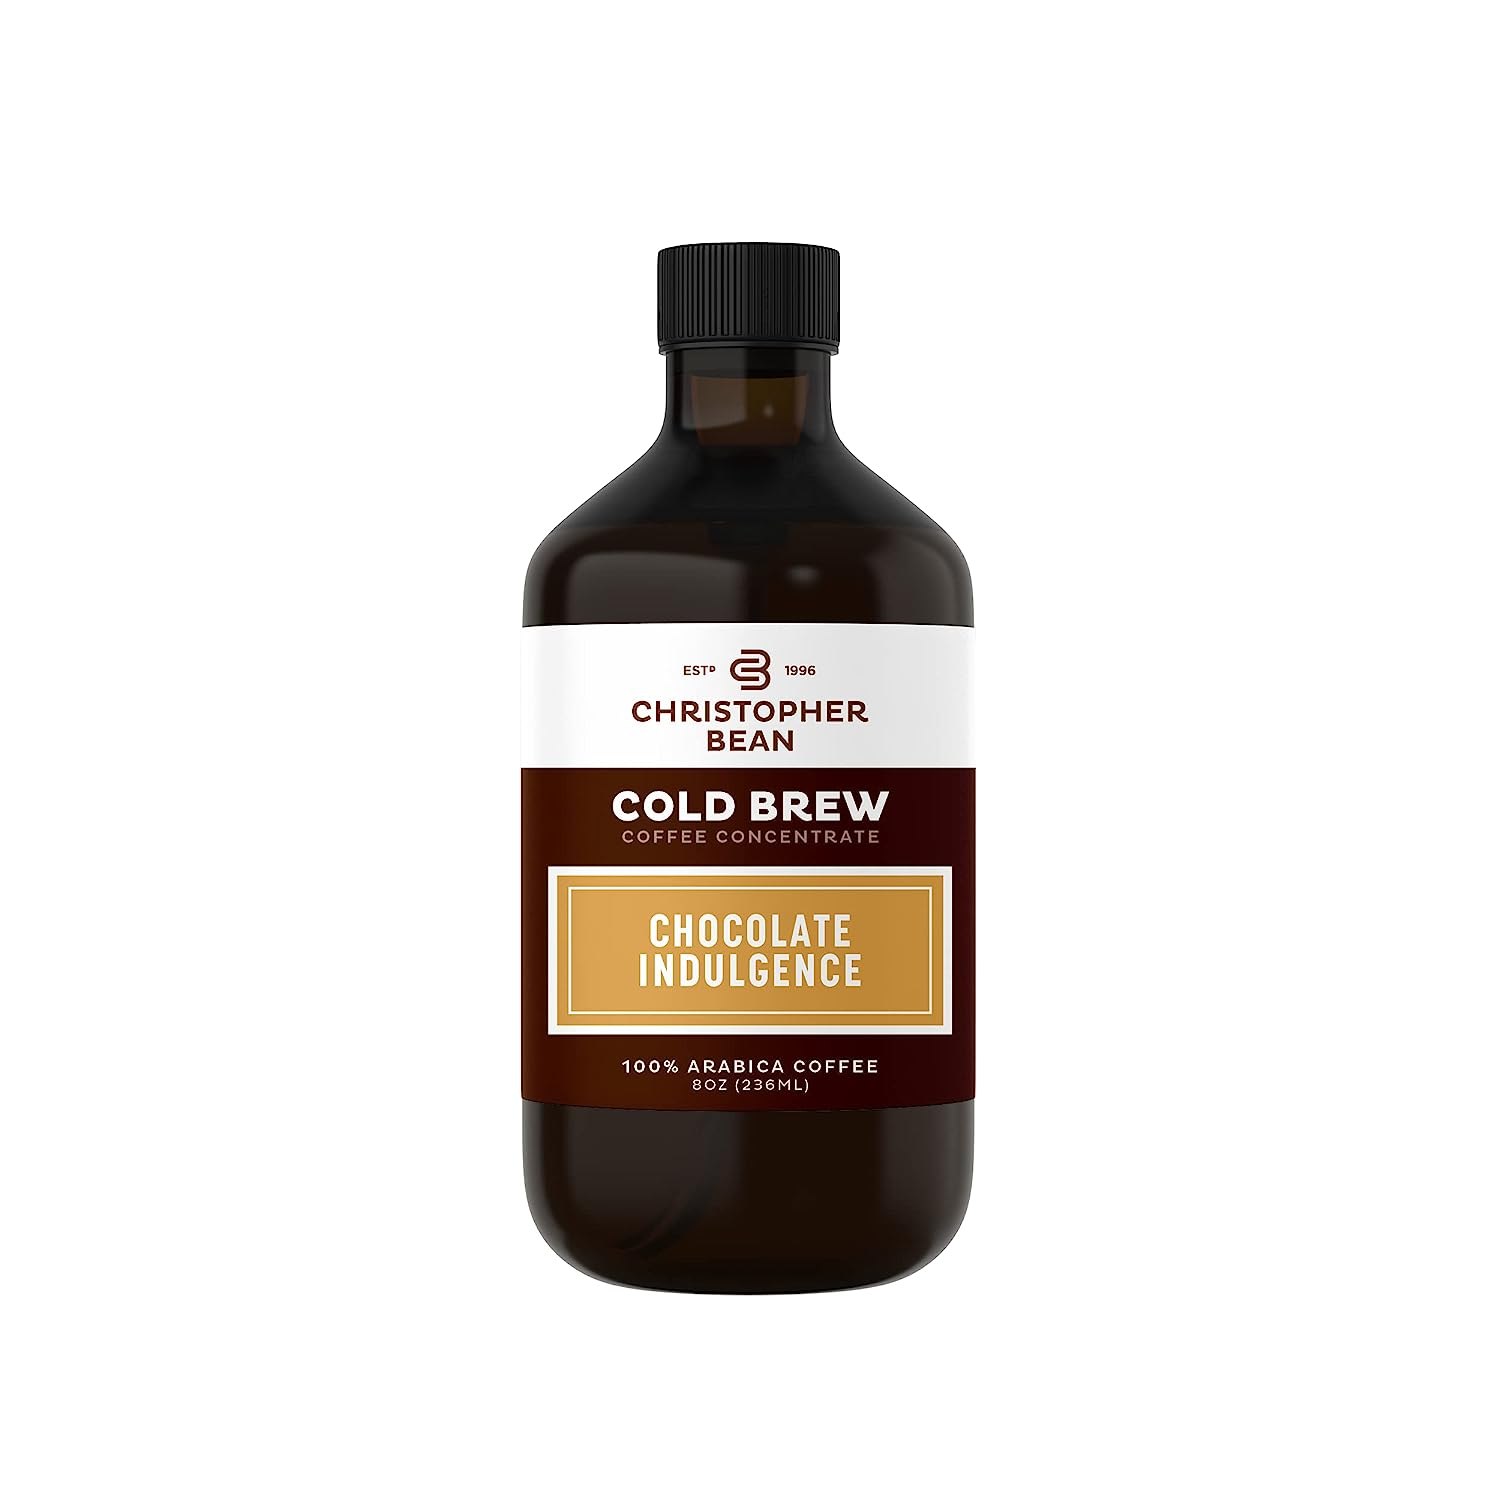 
Christopher Bean Chocolate Indulgence Flavored Coffee Concentrate 8 Oz Bottle, chocolate-flavored coffee concentrates